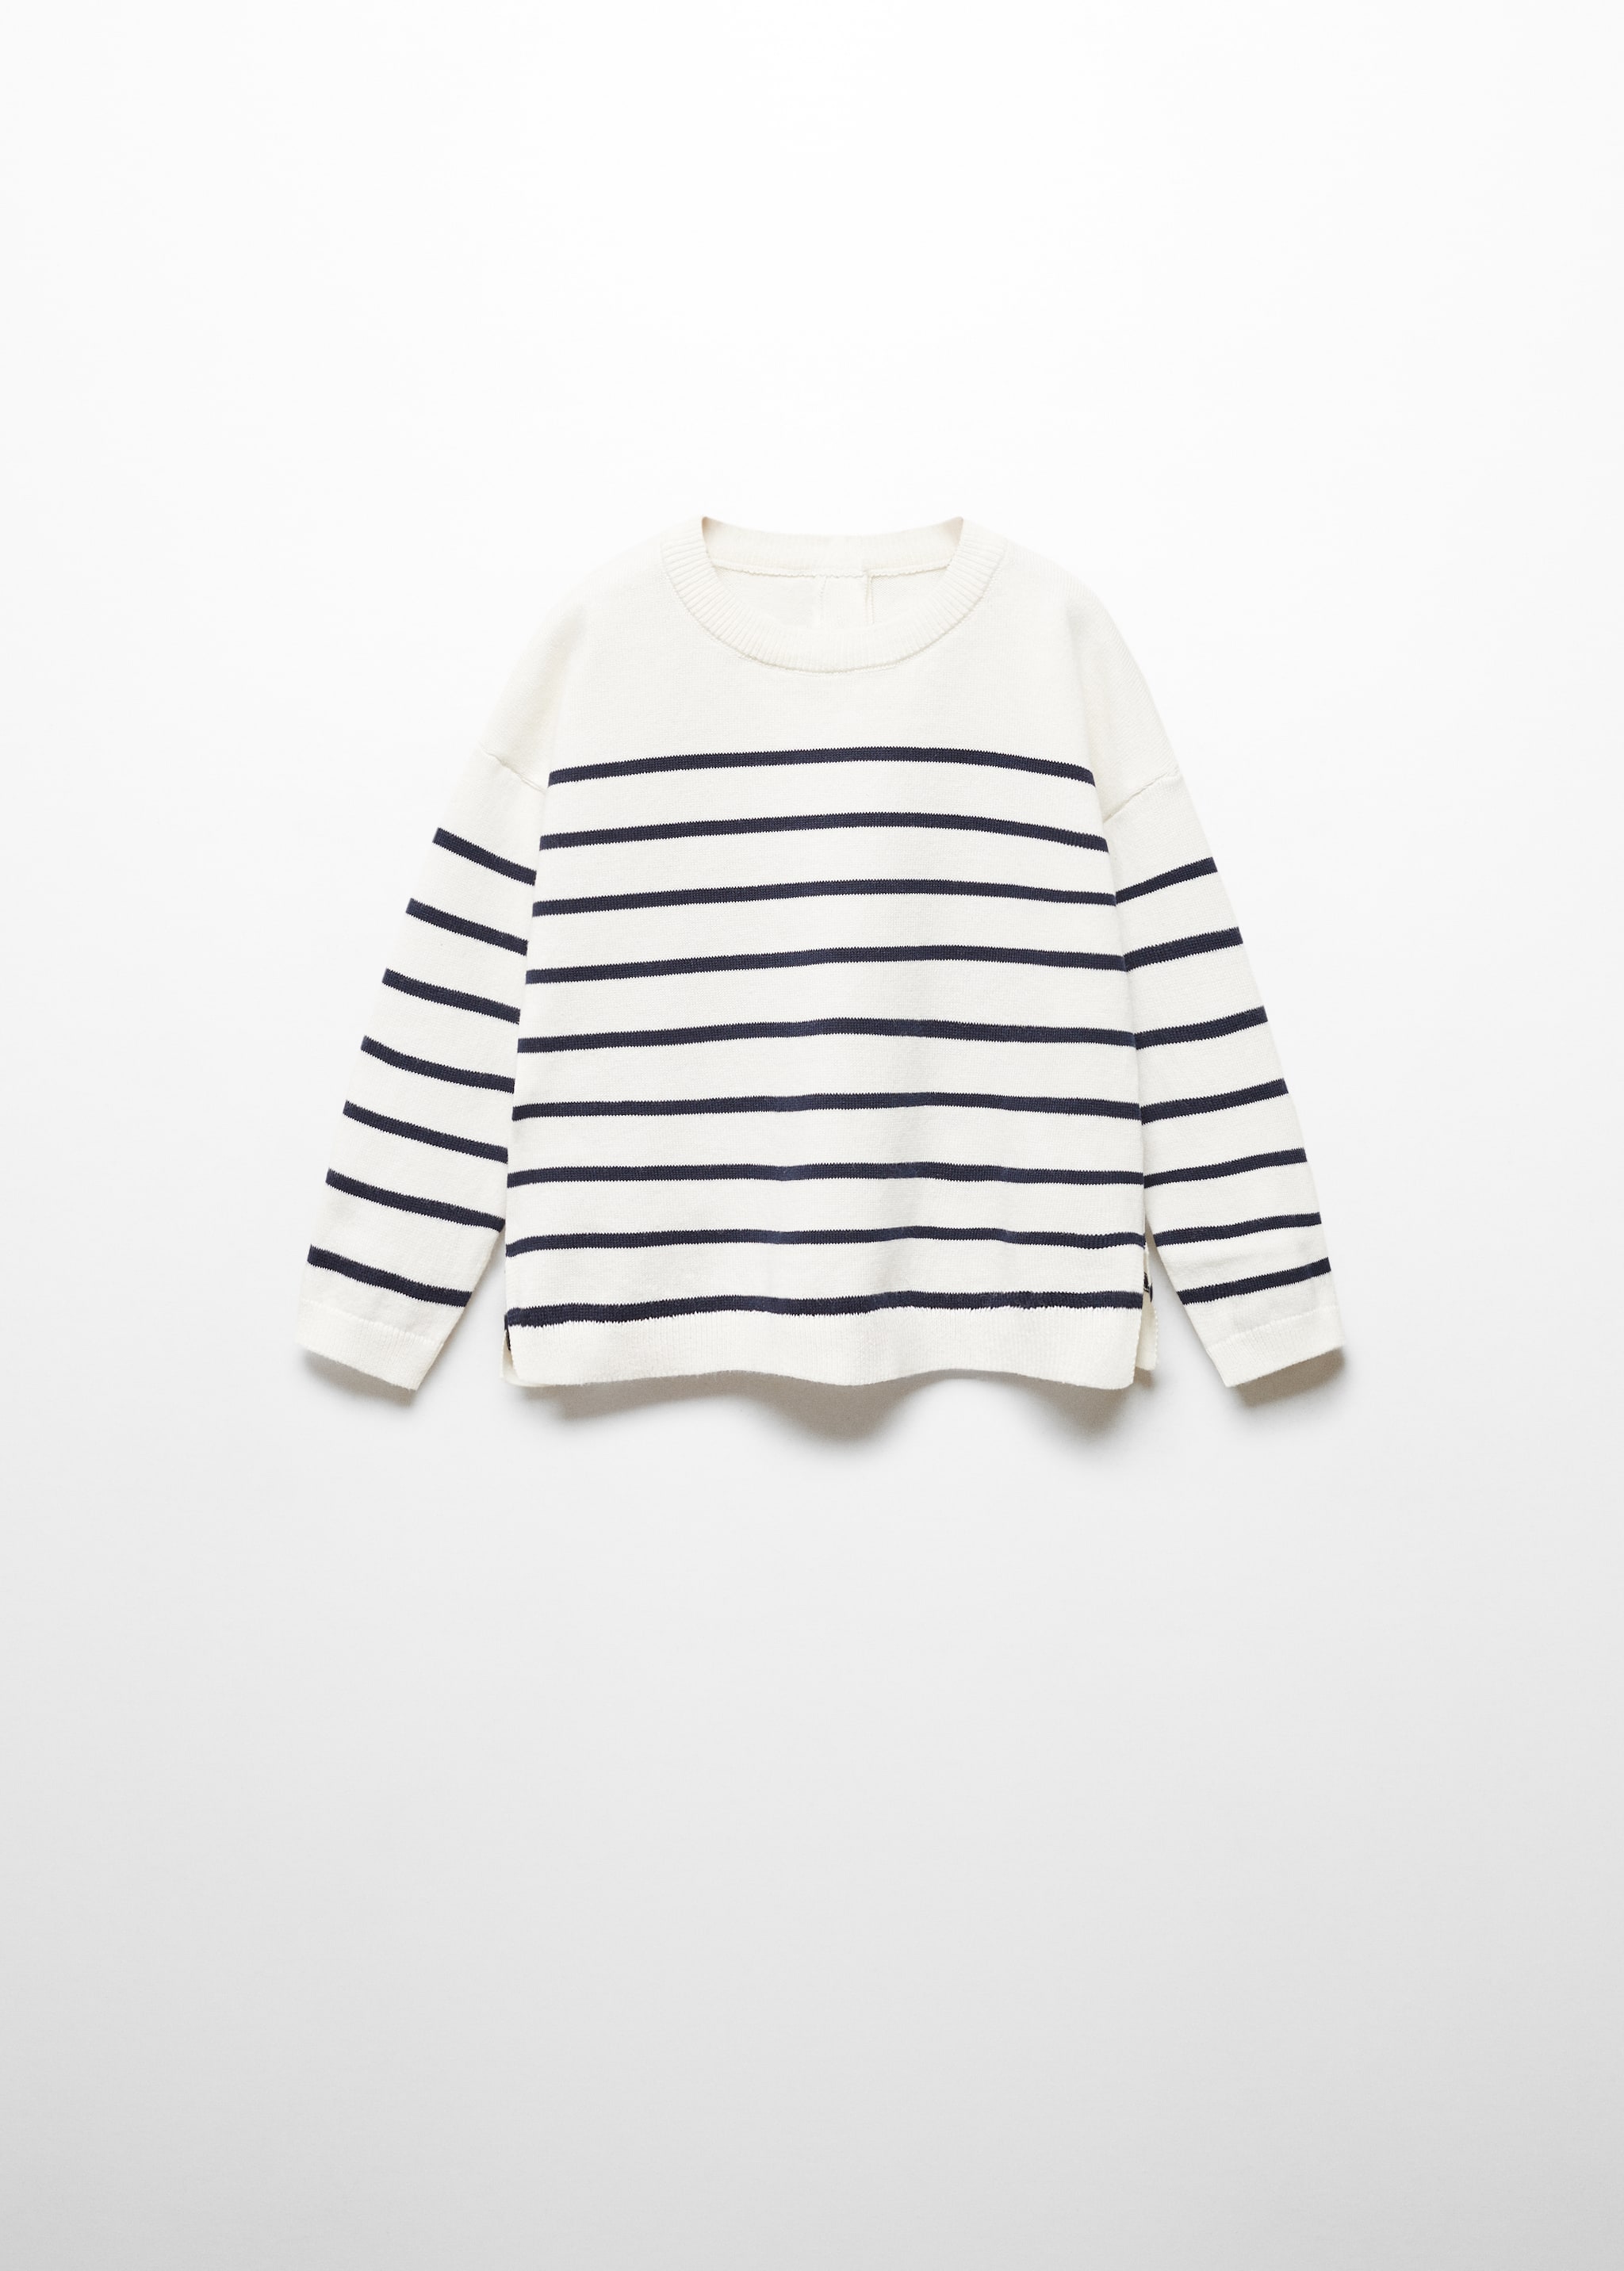 Stripe pattern sweater - Article without model